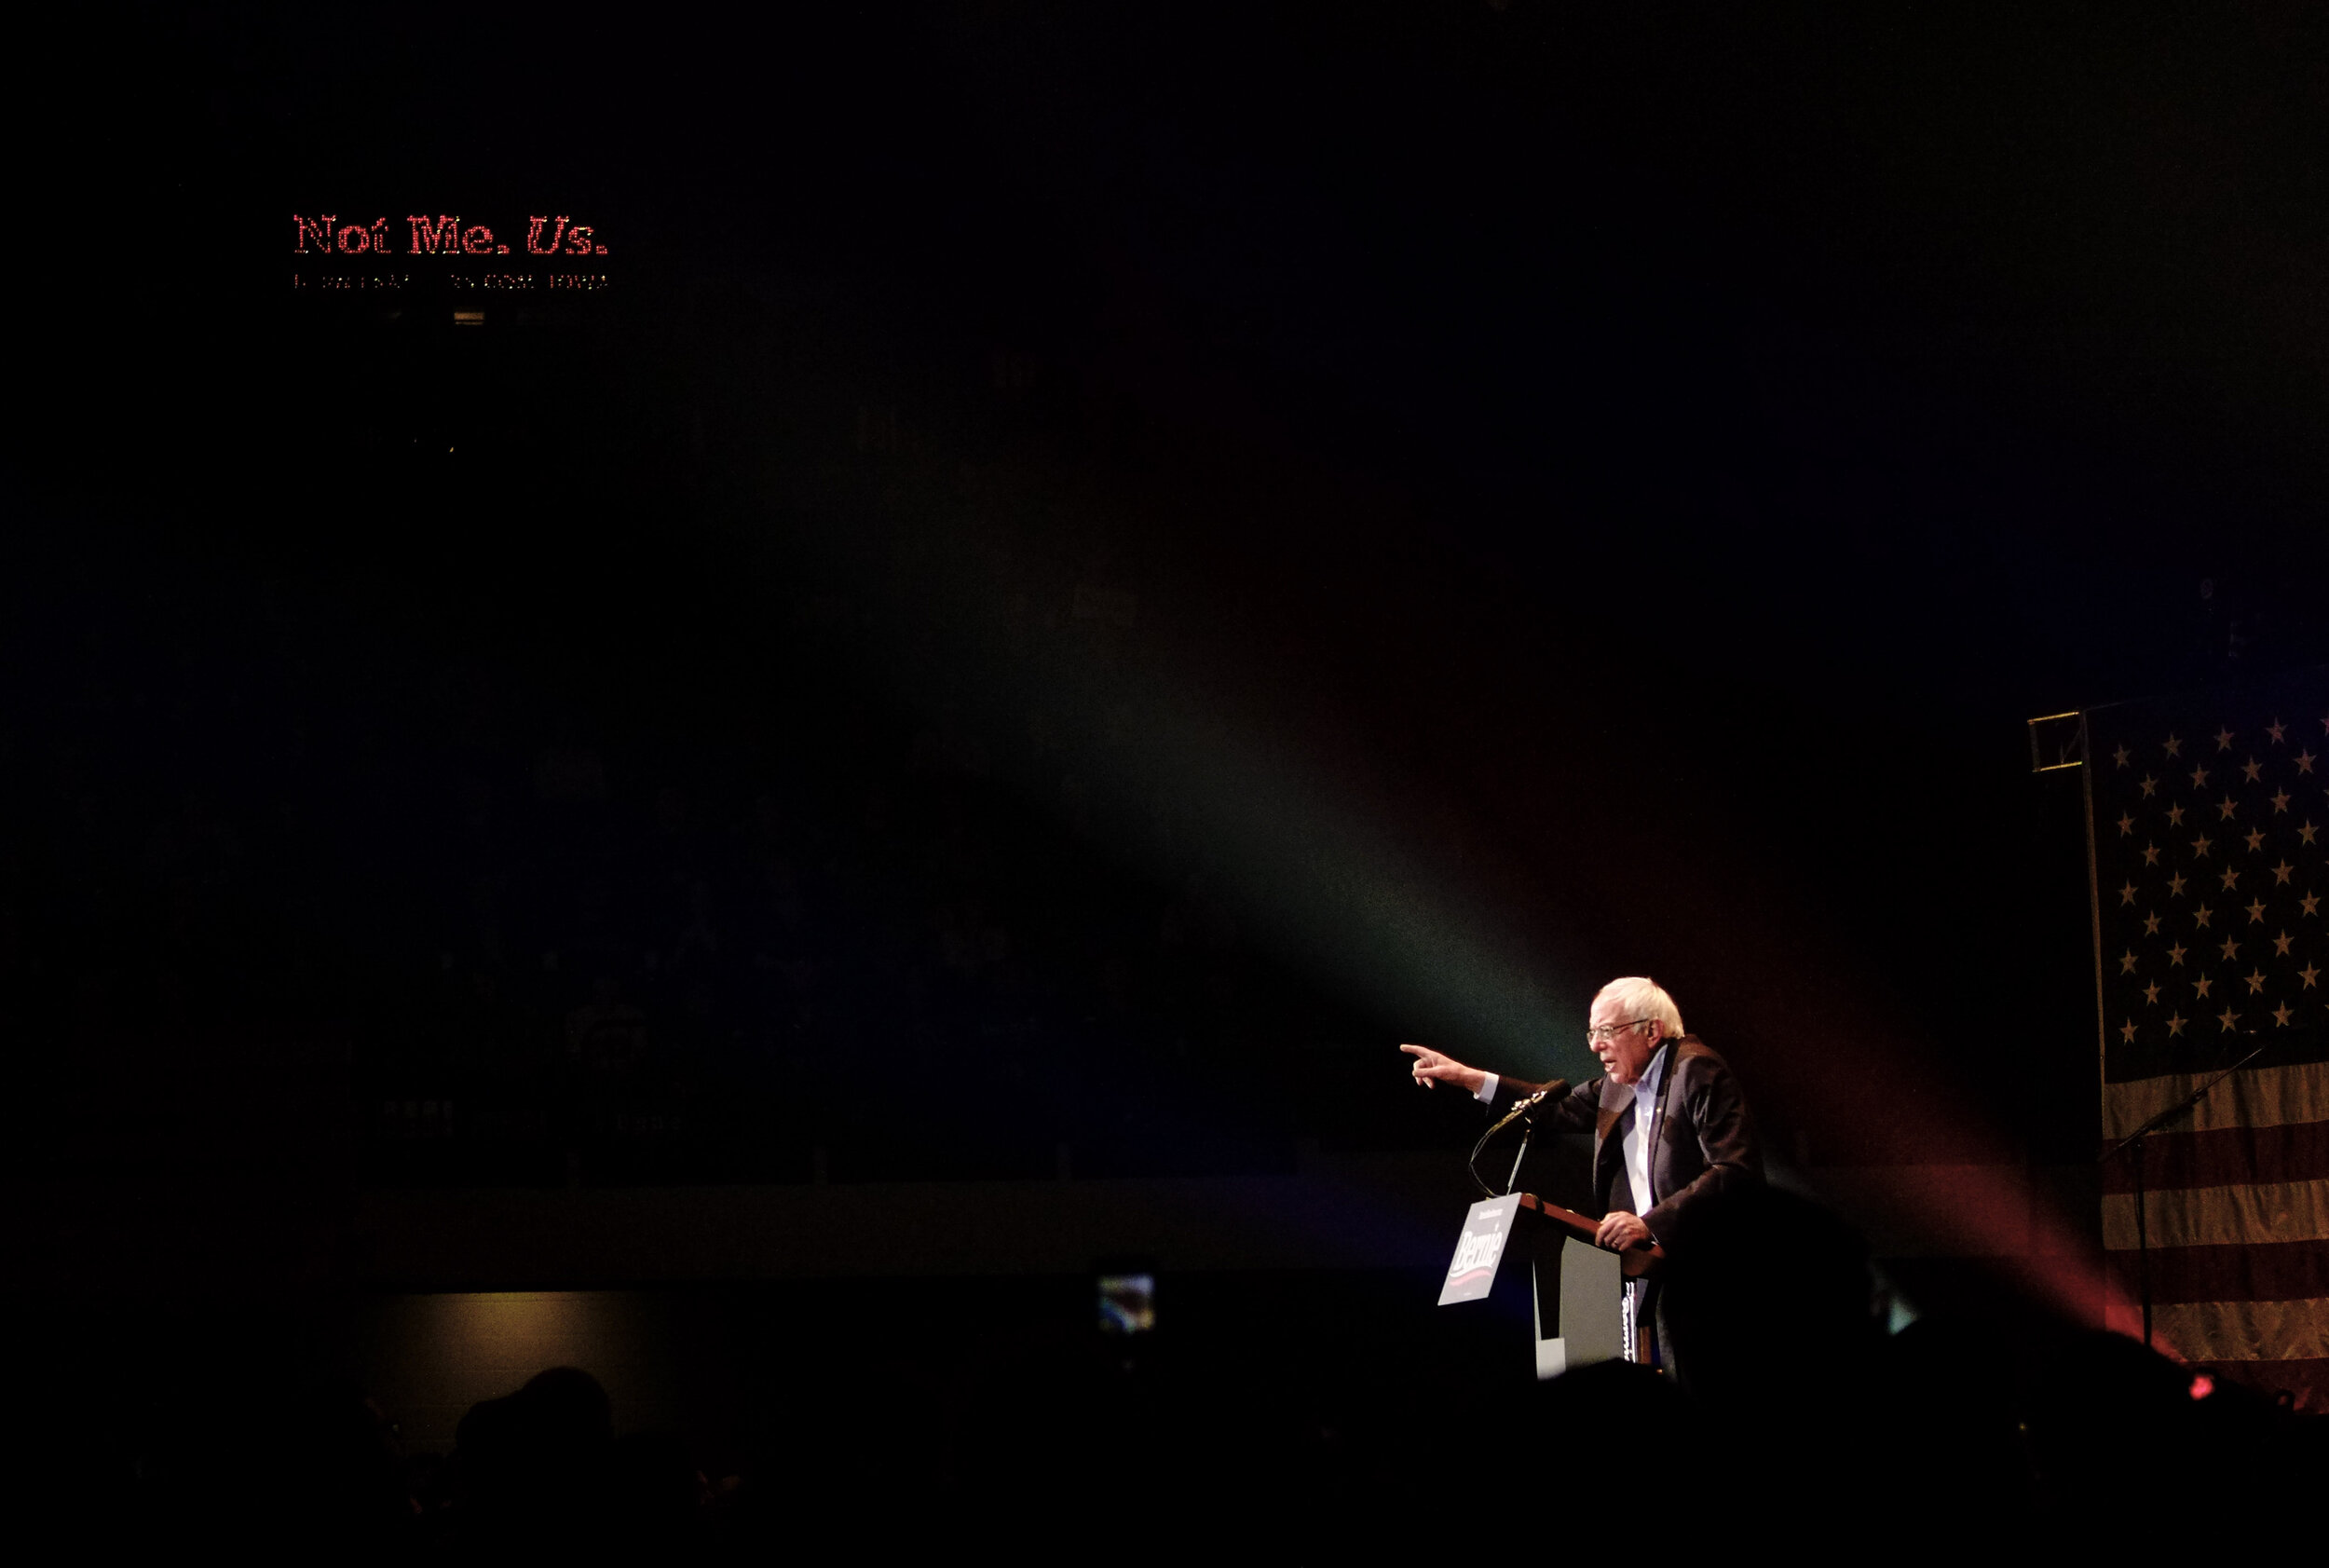  Democratic candidate Bernie Sanders delivers a speech during a rally in Cedar Rapids, Iowa before the Iowa Caucuses on February 1, 2020.  